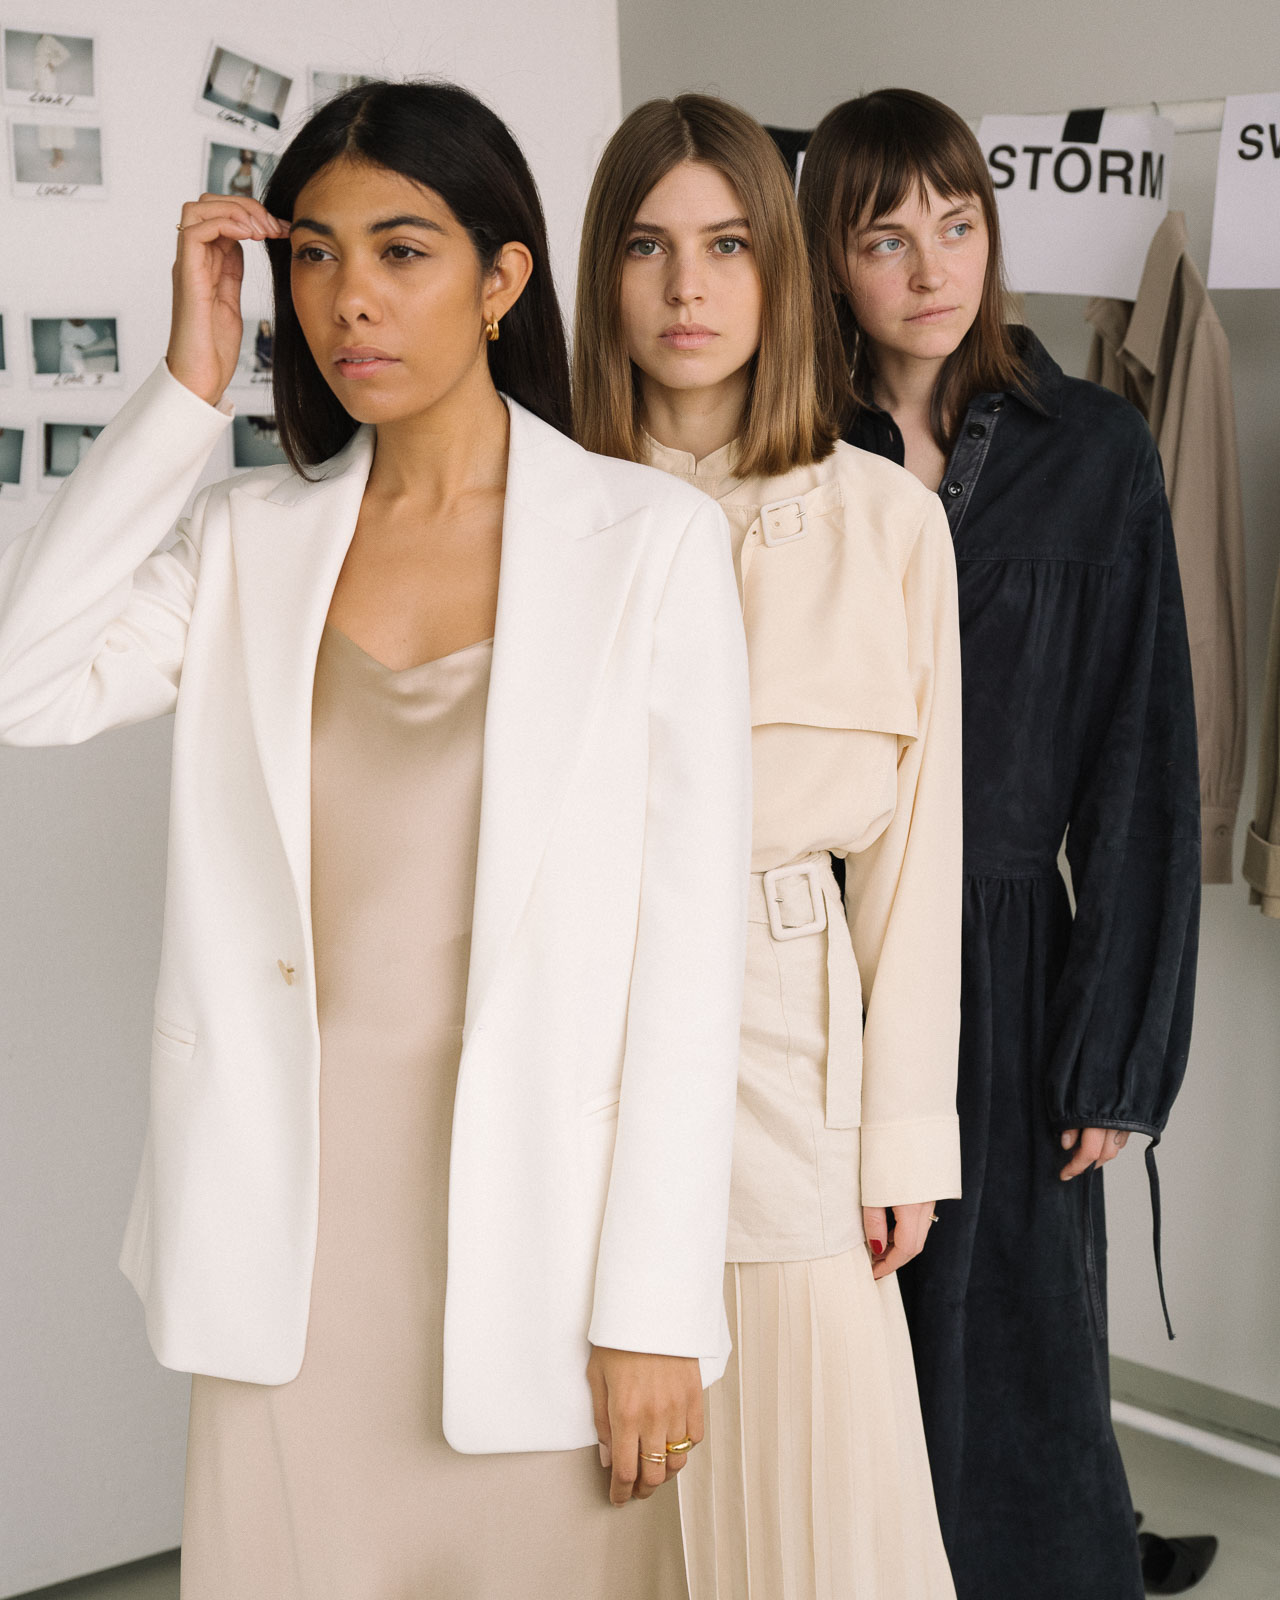 storm wears joseph SS19 Sommer collection with Trenton Jacket and Stone Silk Satin Dress, Swantje wears Tally Fuji Silk Blouse and Sissi Pohle wears Claudia Suede Dress